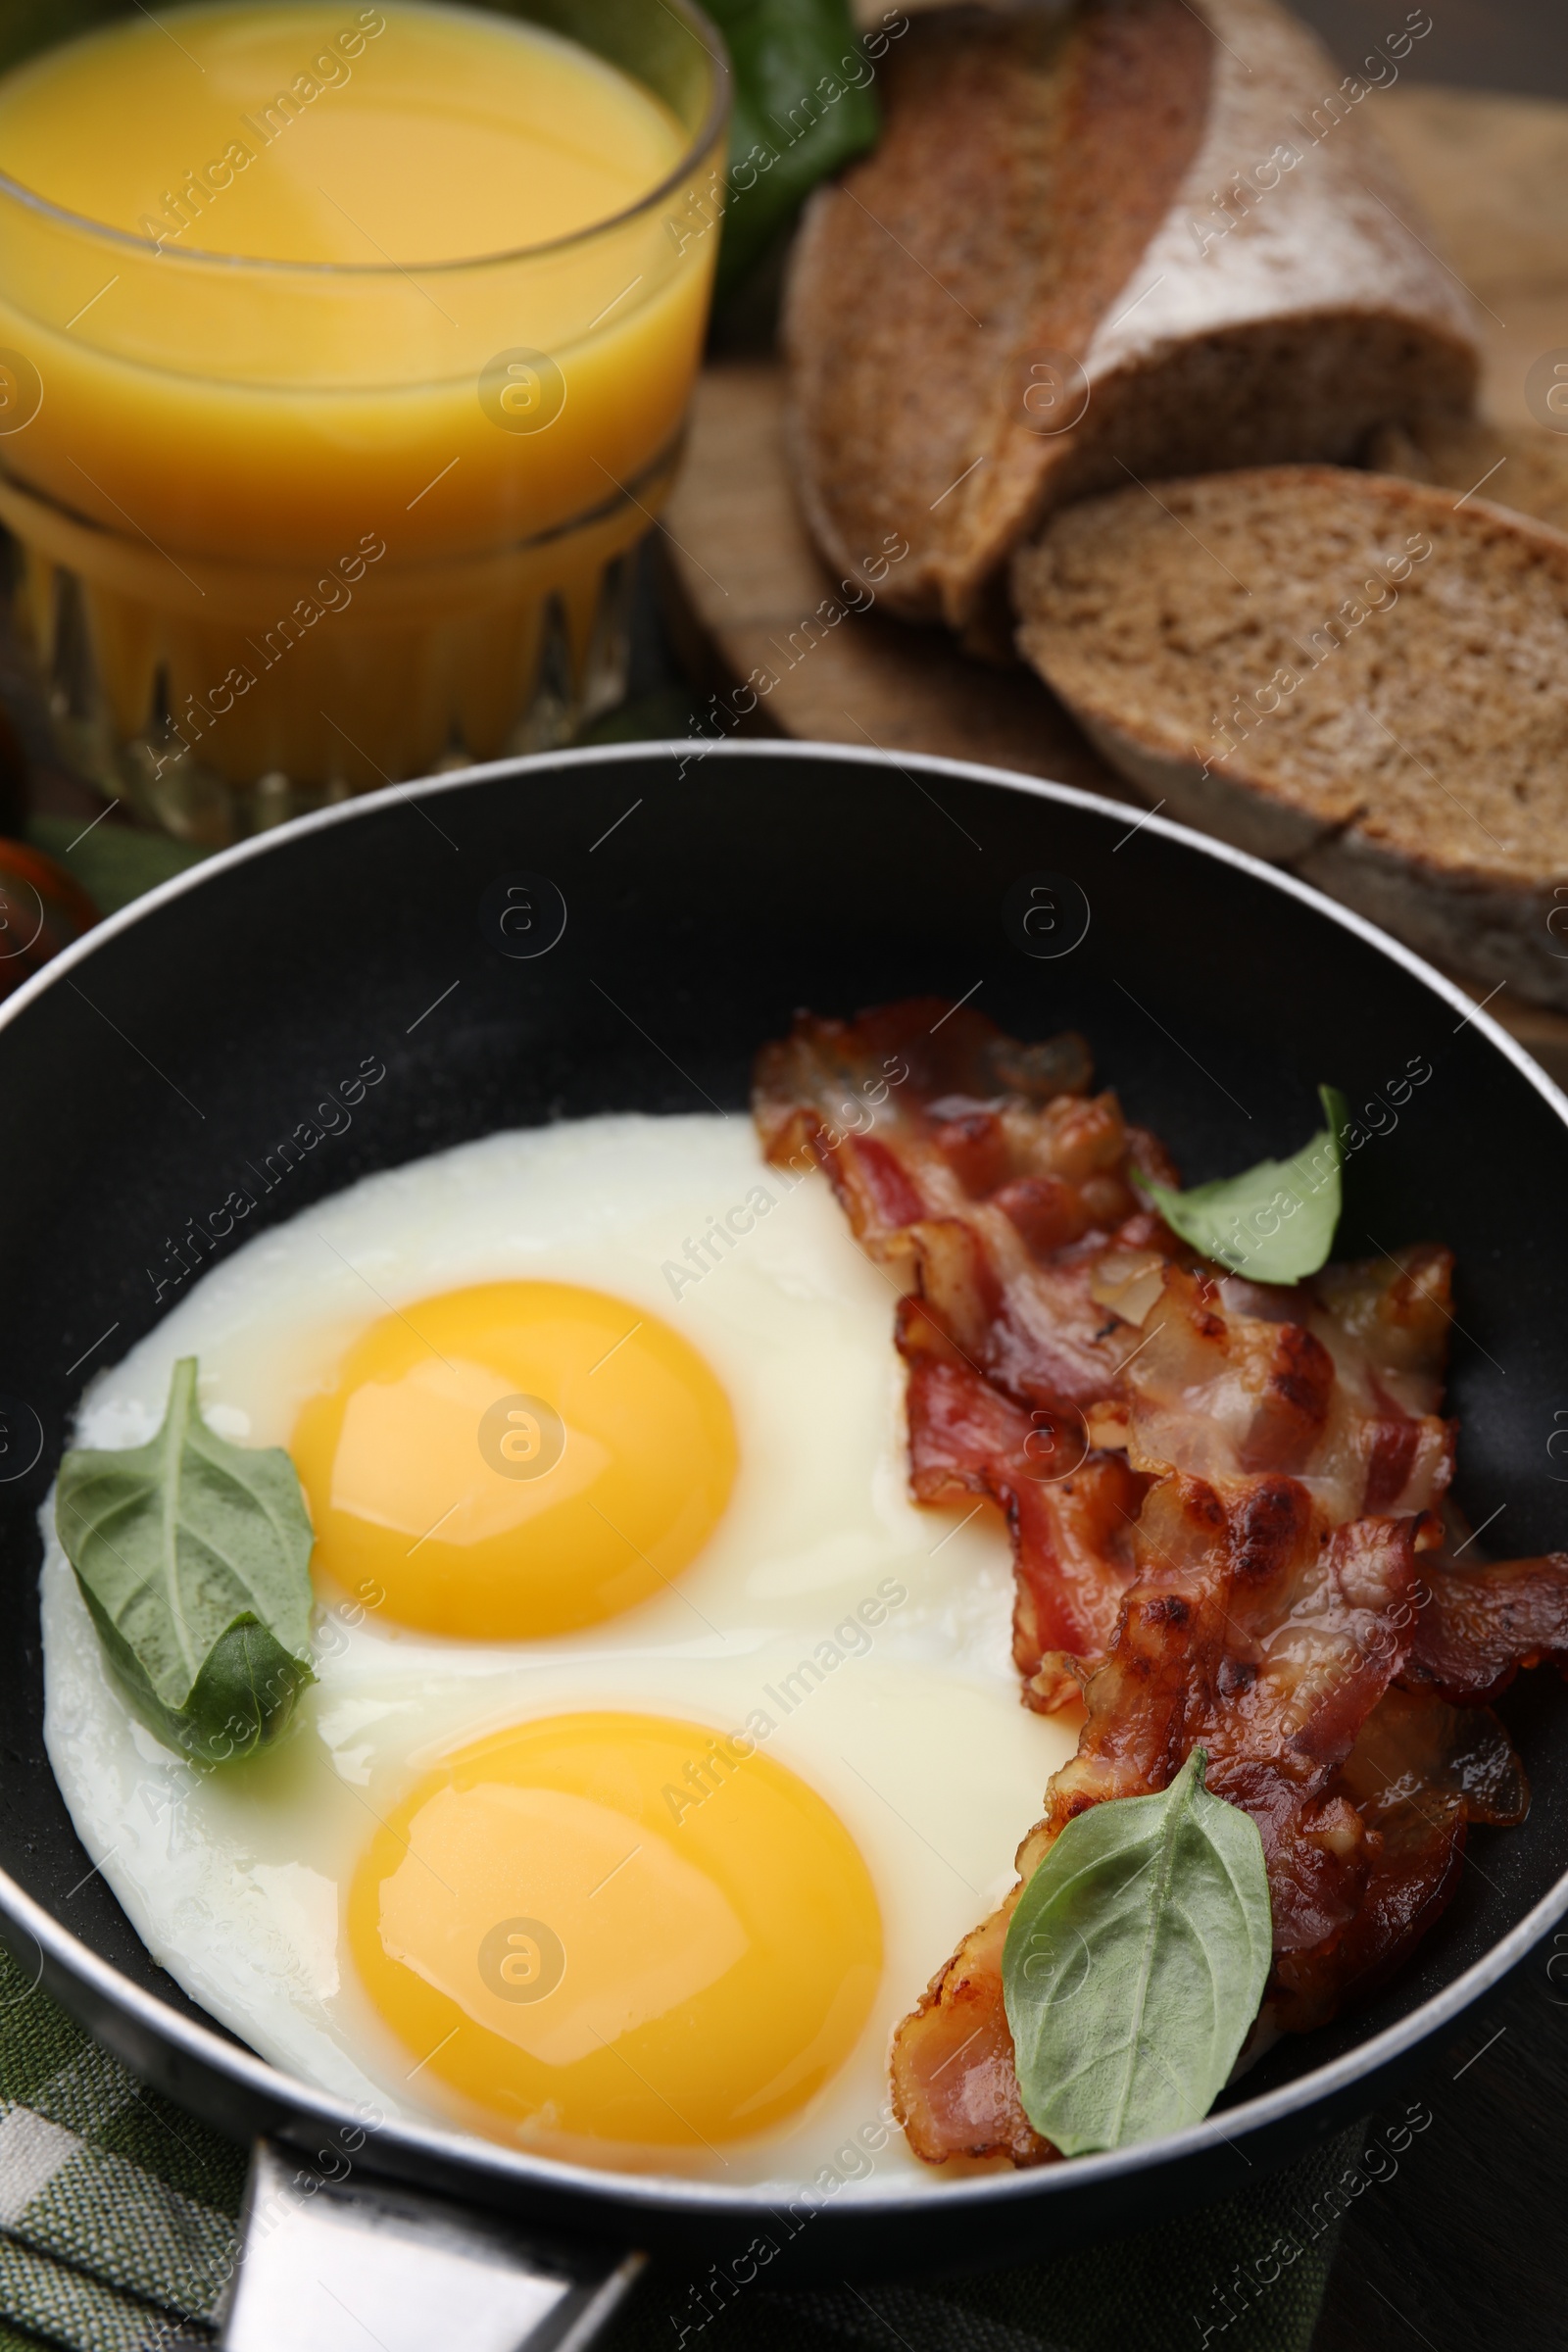 Photo of Fried eggs, bacon, basil, juice and bread on table